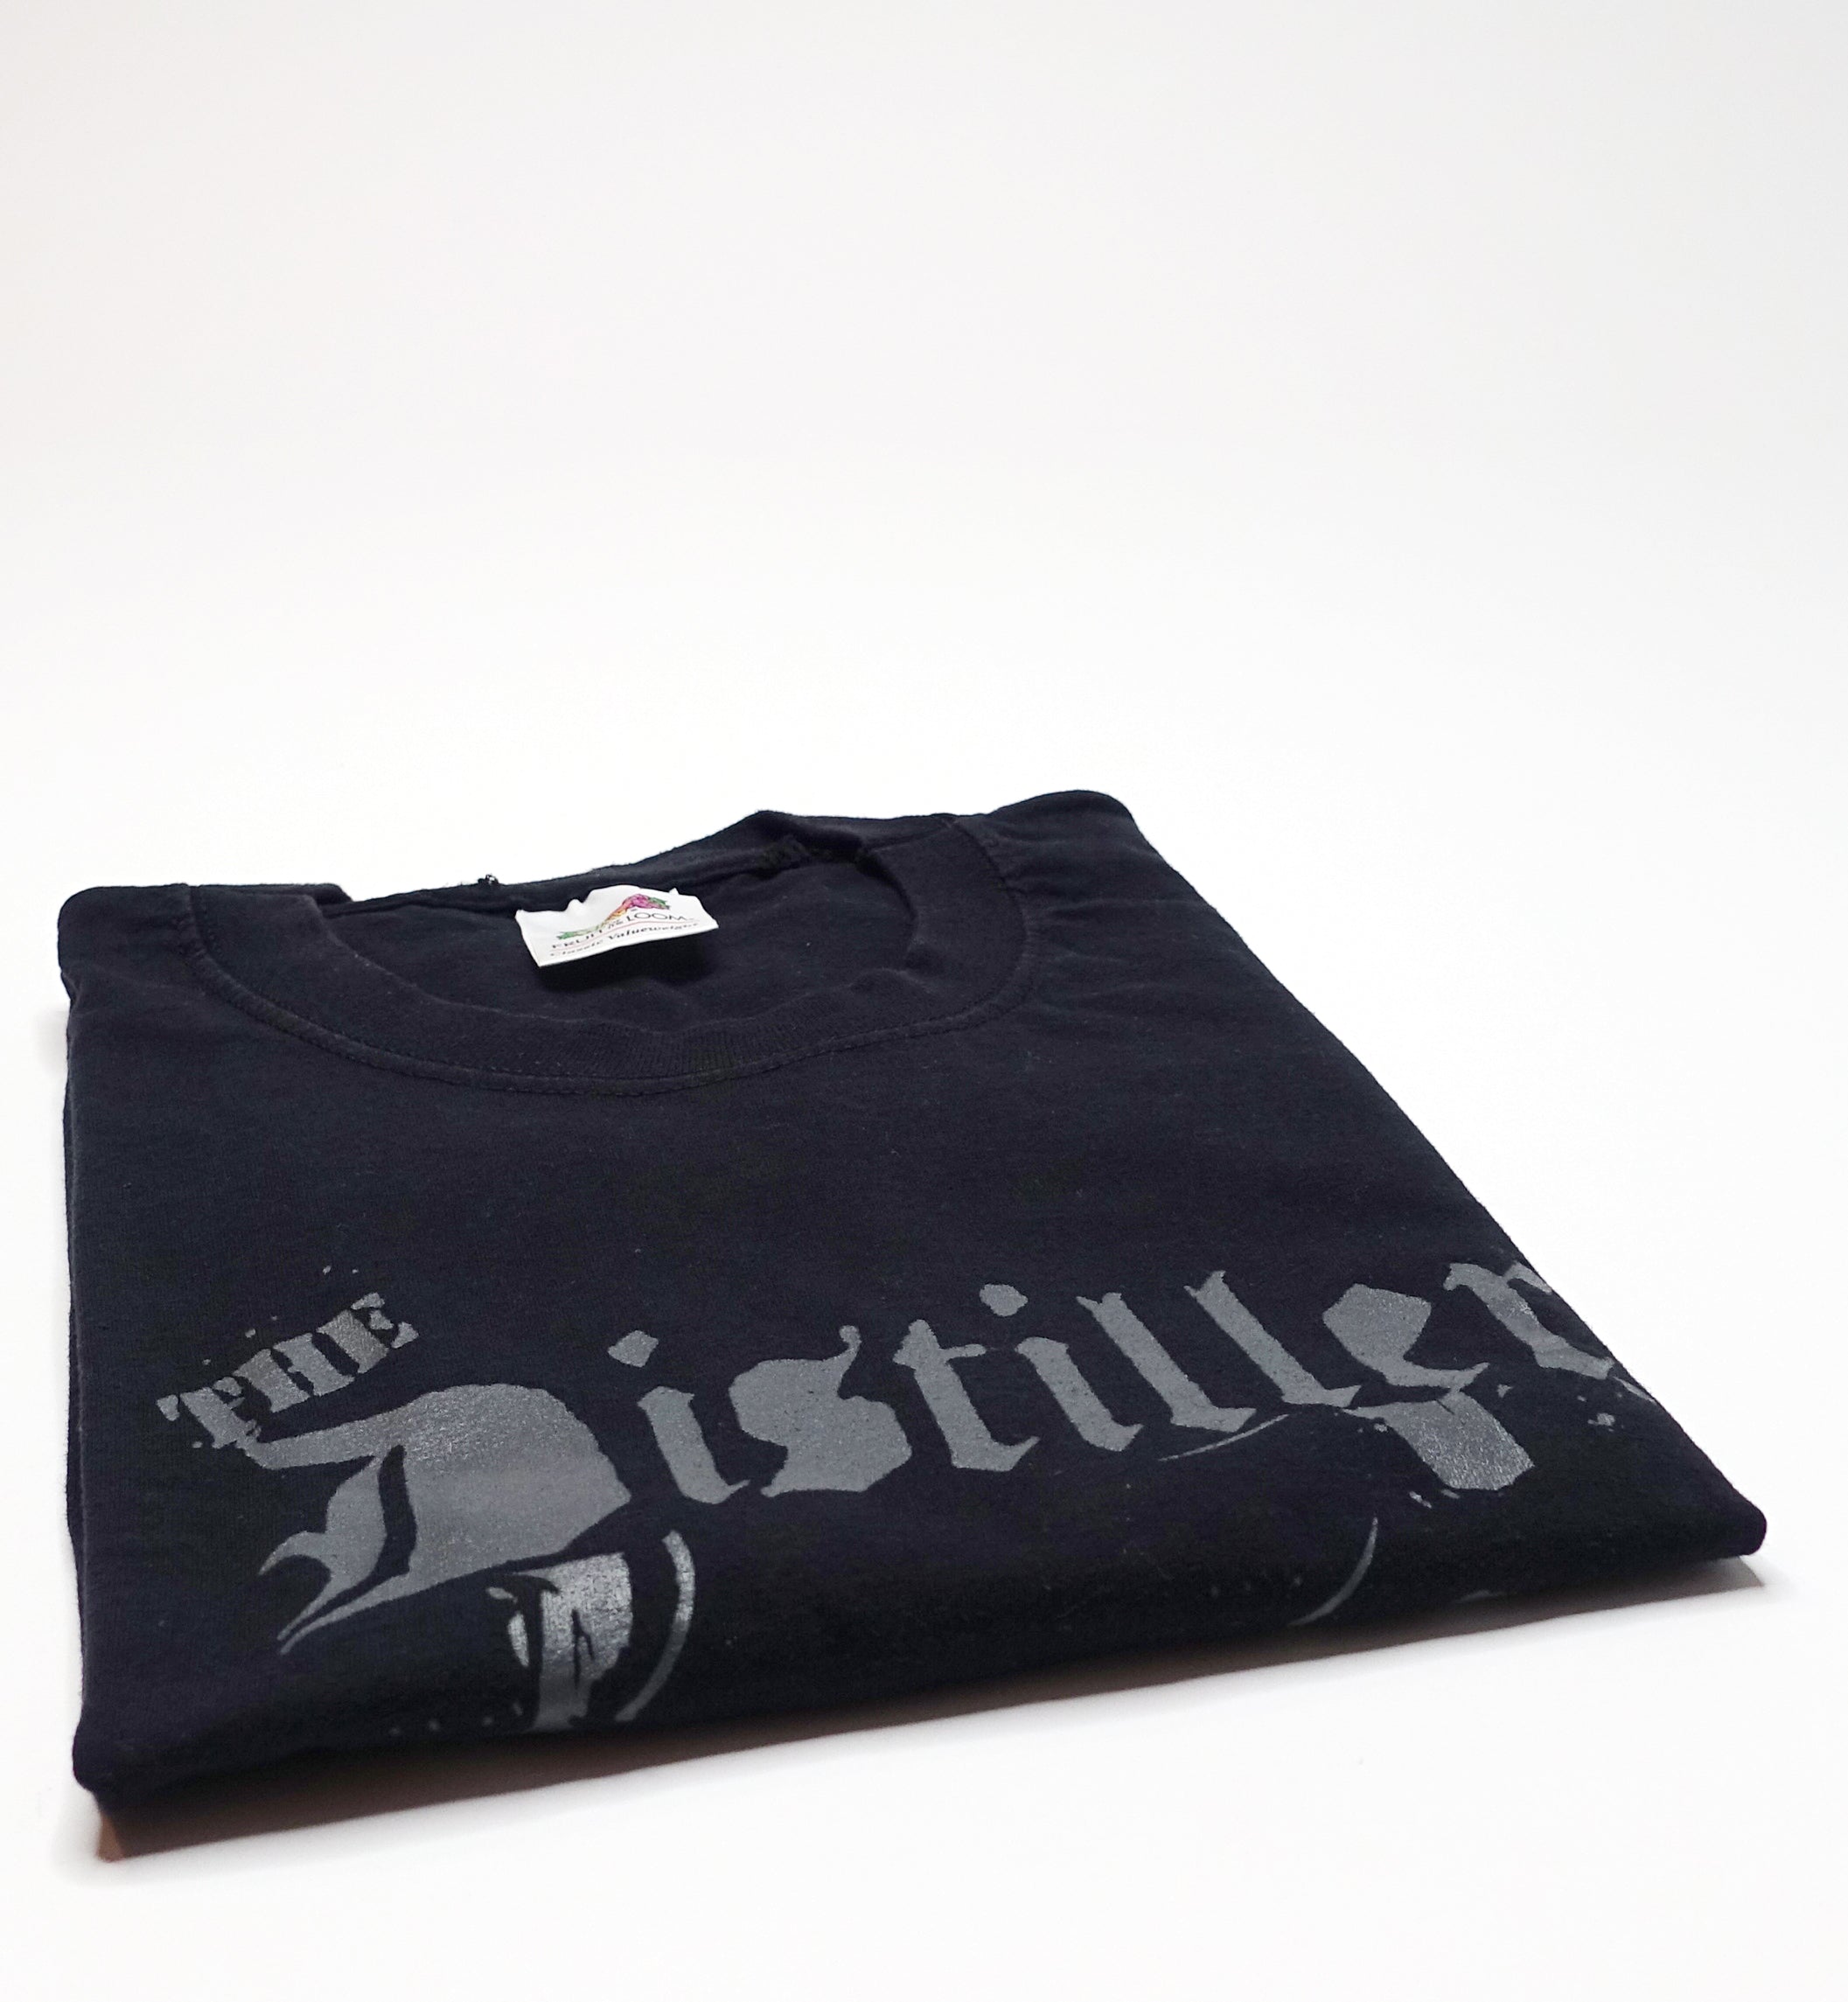 the Distillers ‎– Coral Fang 2004 Euro Tour Shirt Size XL